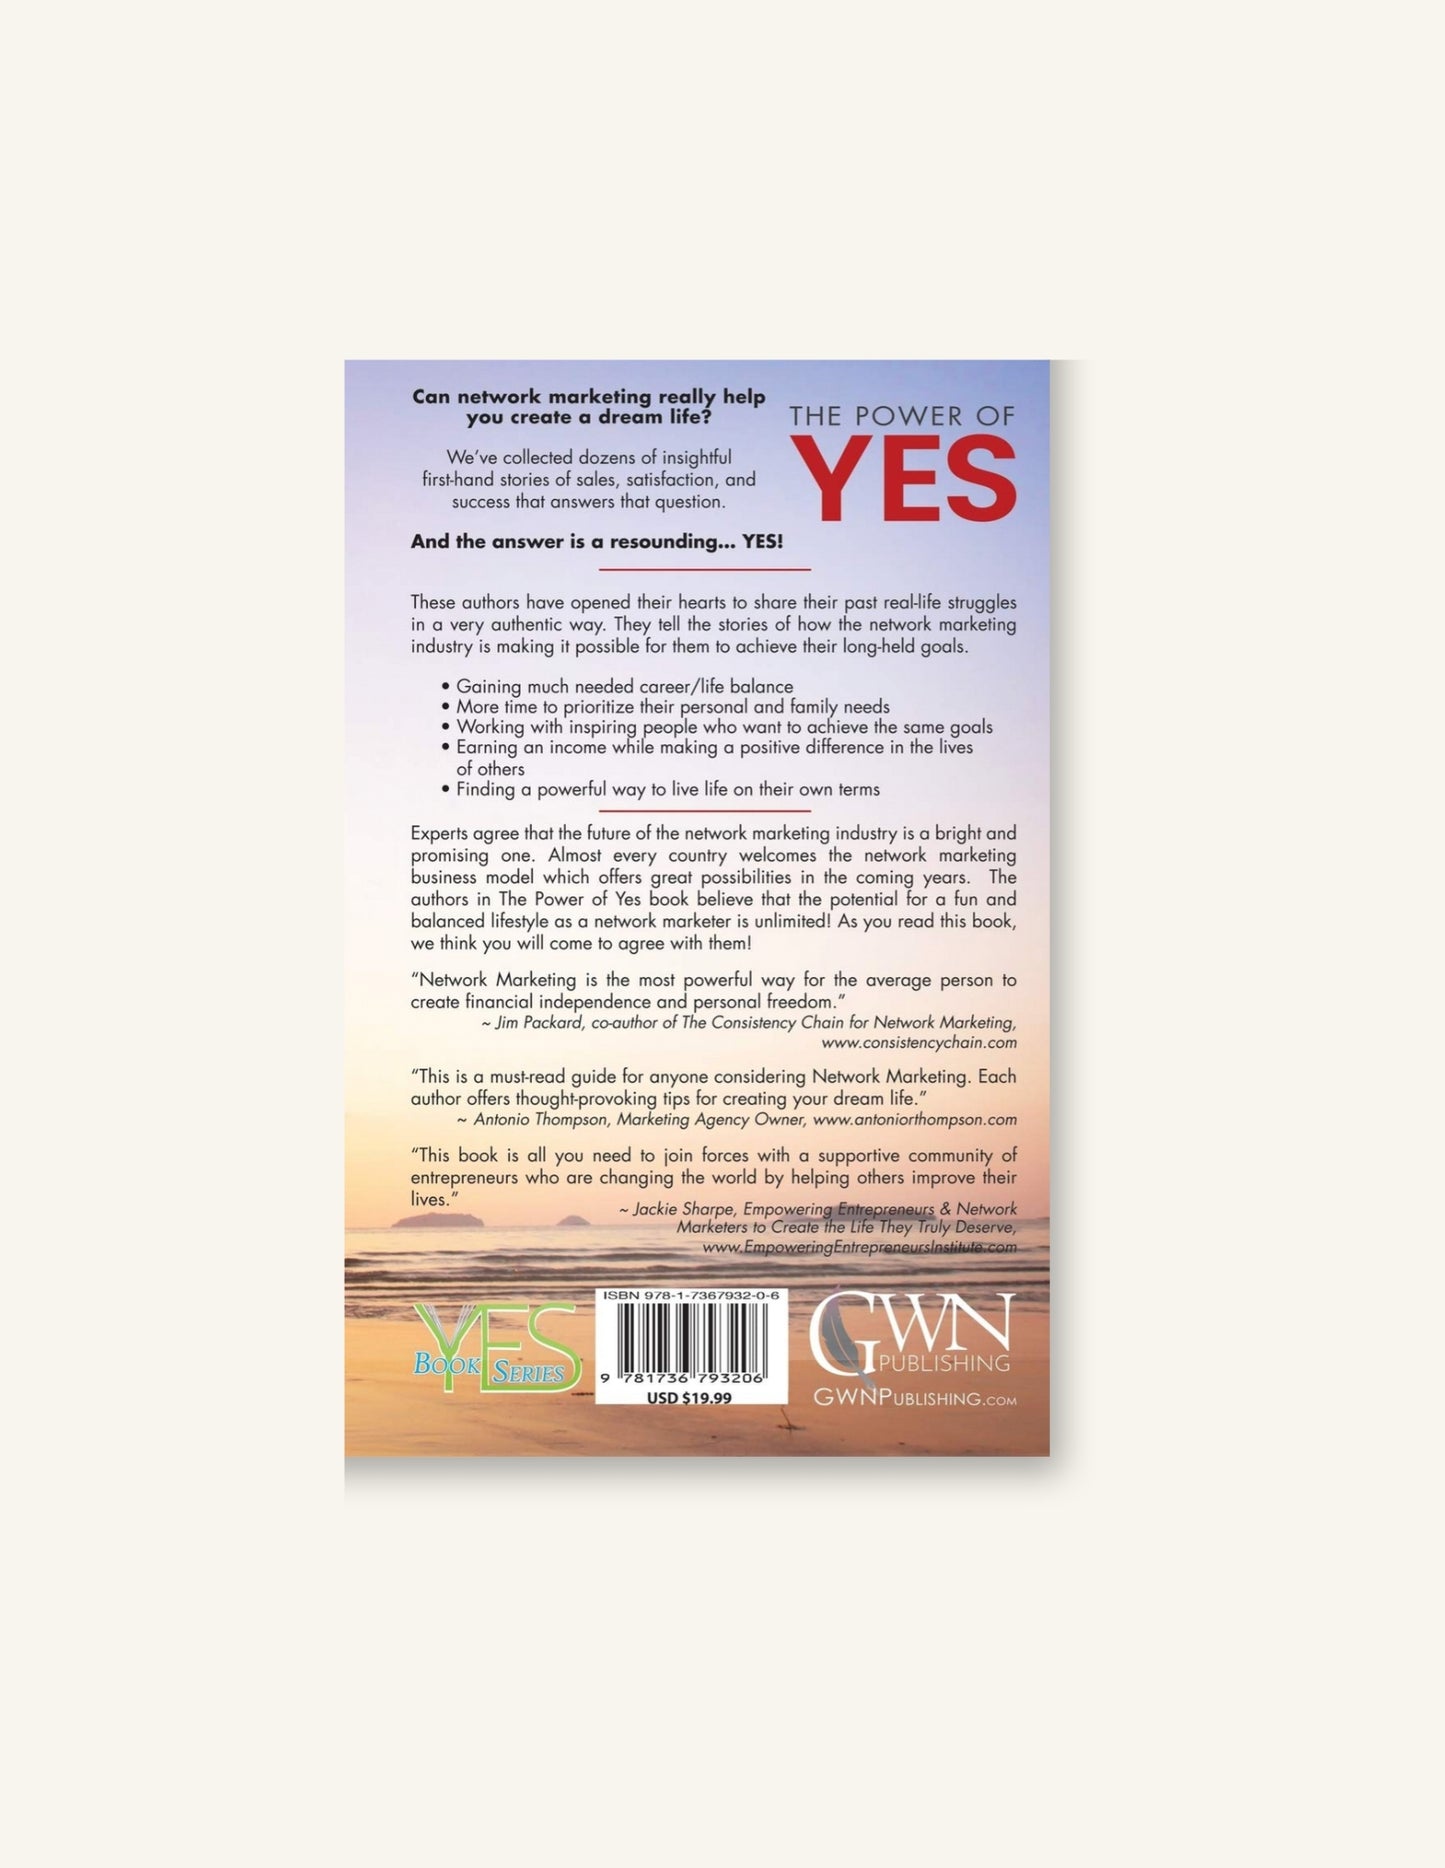 The Power of YES: How Network Marketing Creates Dream Lives, Autographed Edition